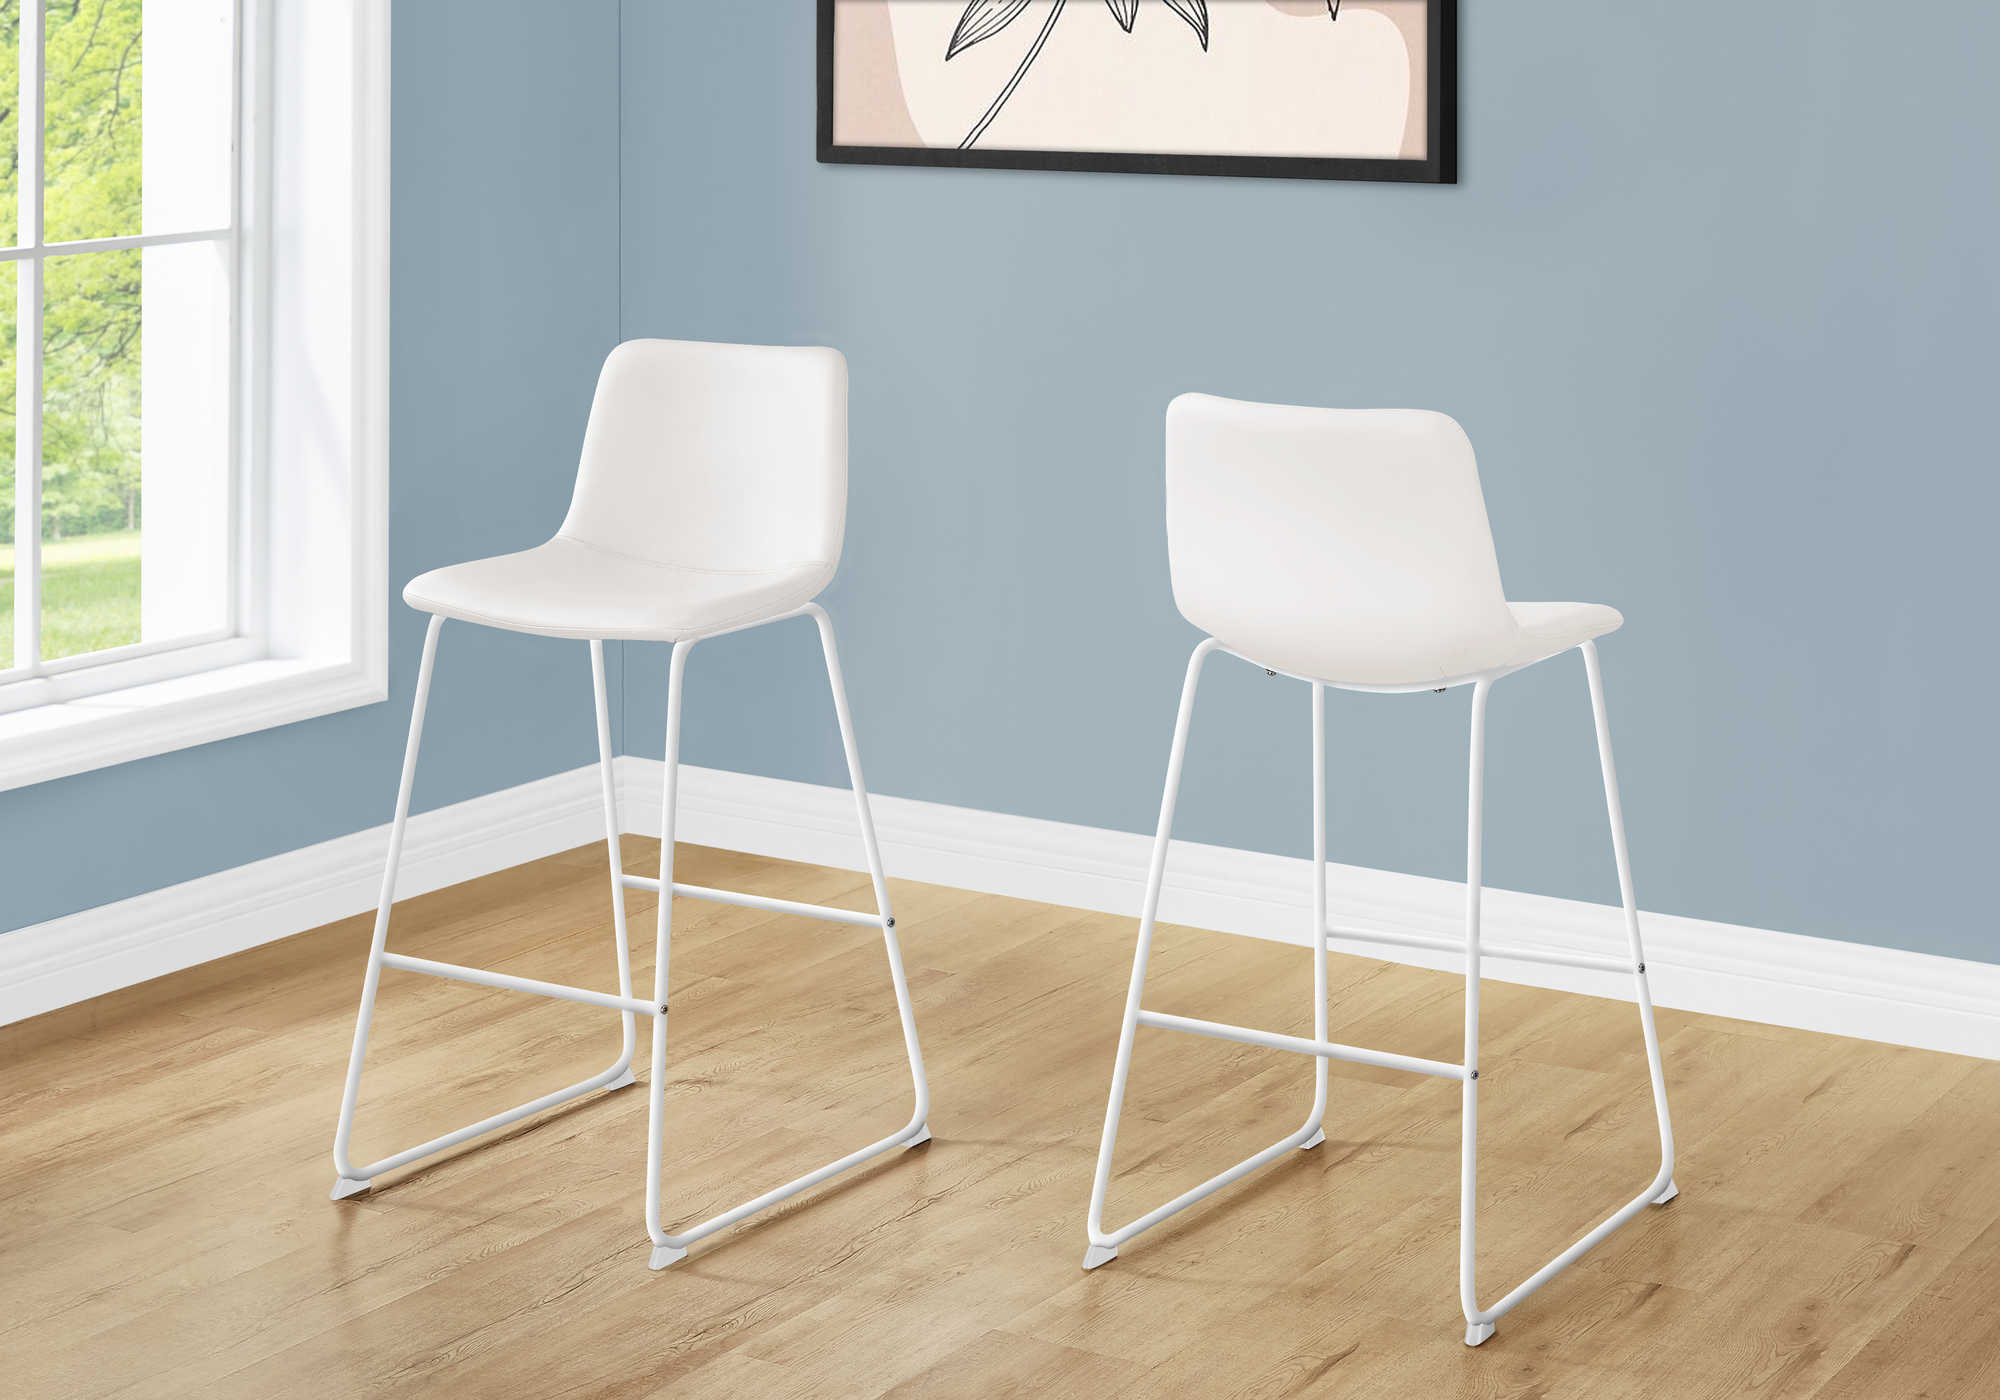 BARSTOOL - 40"H / WHITE LEATHER-LOOK / WHITE METAL